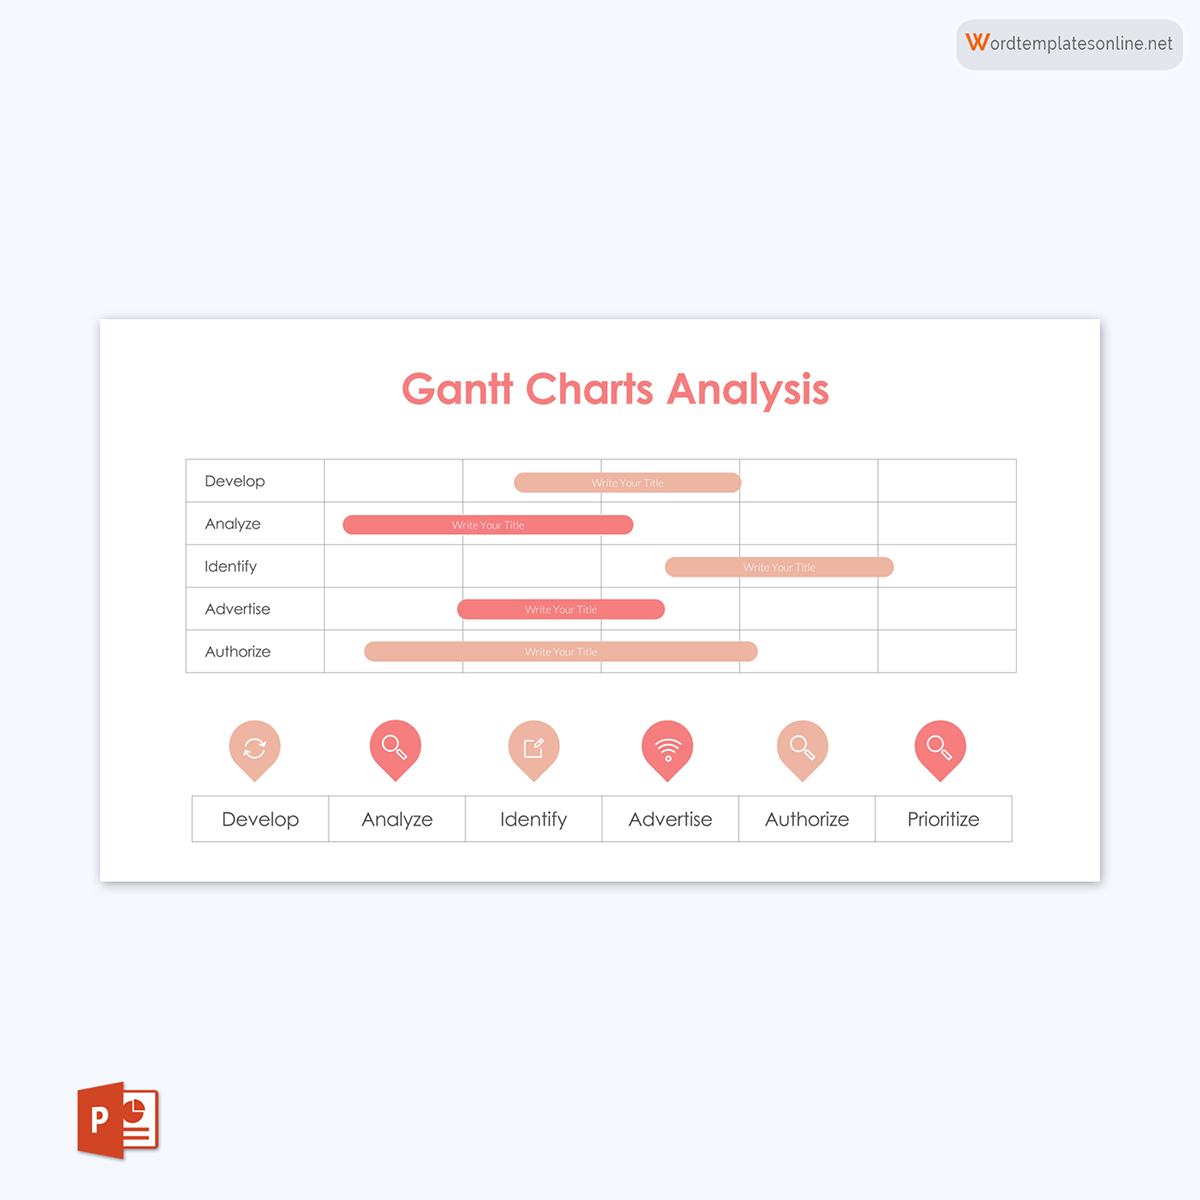 Professional Editable Title Based Gantt Chart Analysis Template 02 as PowerPoint Slides